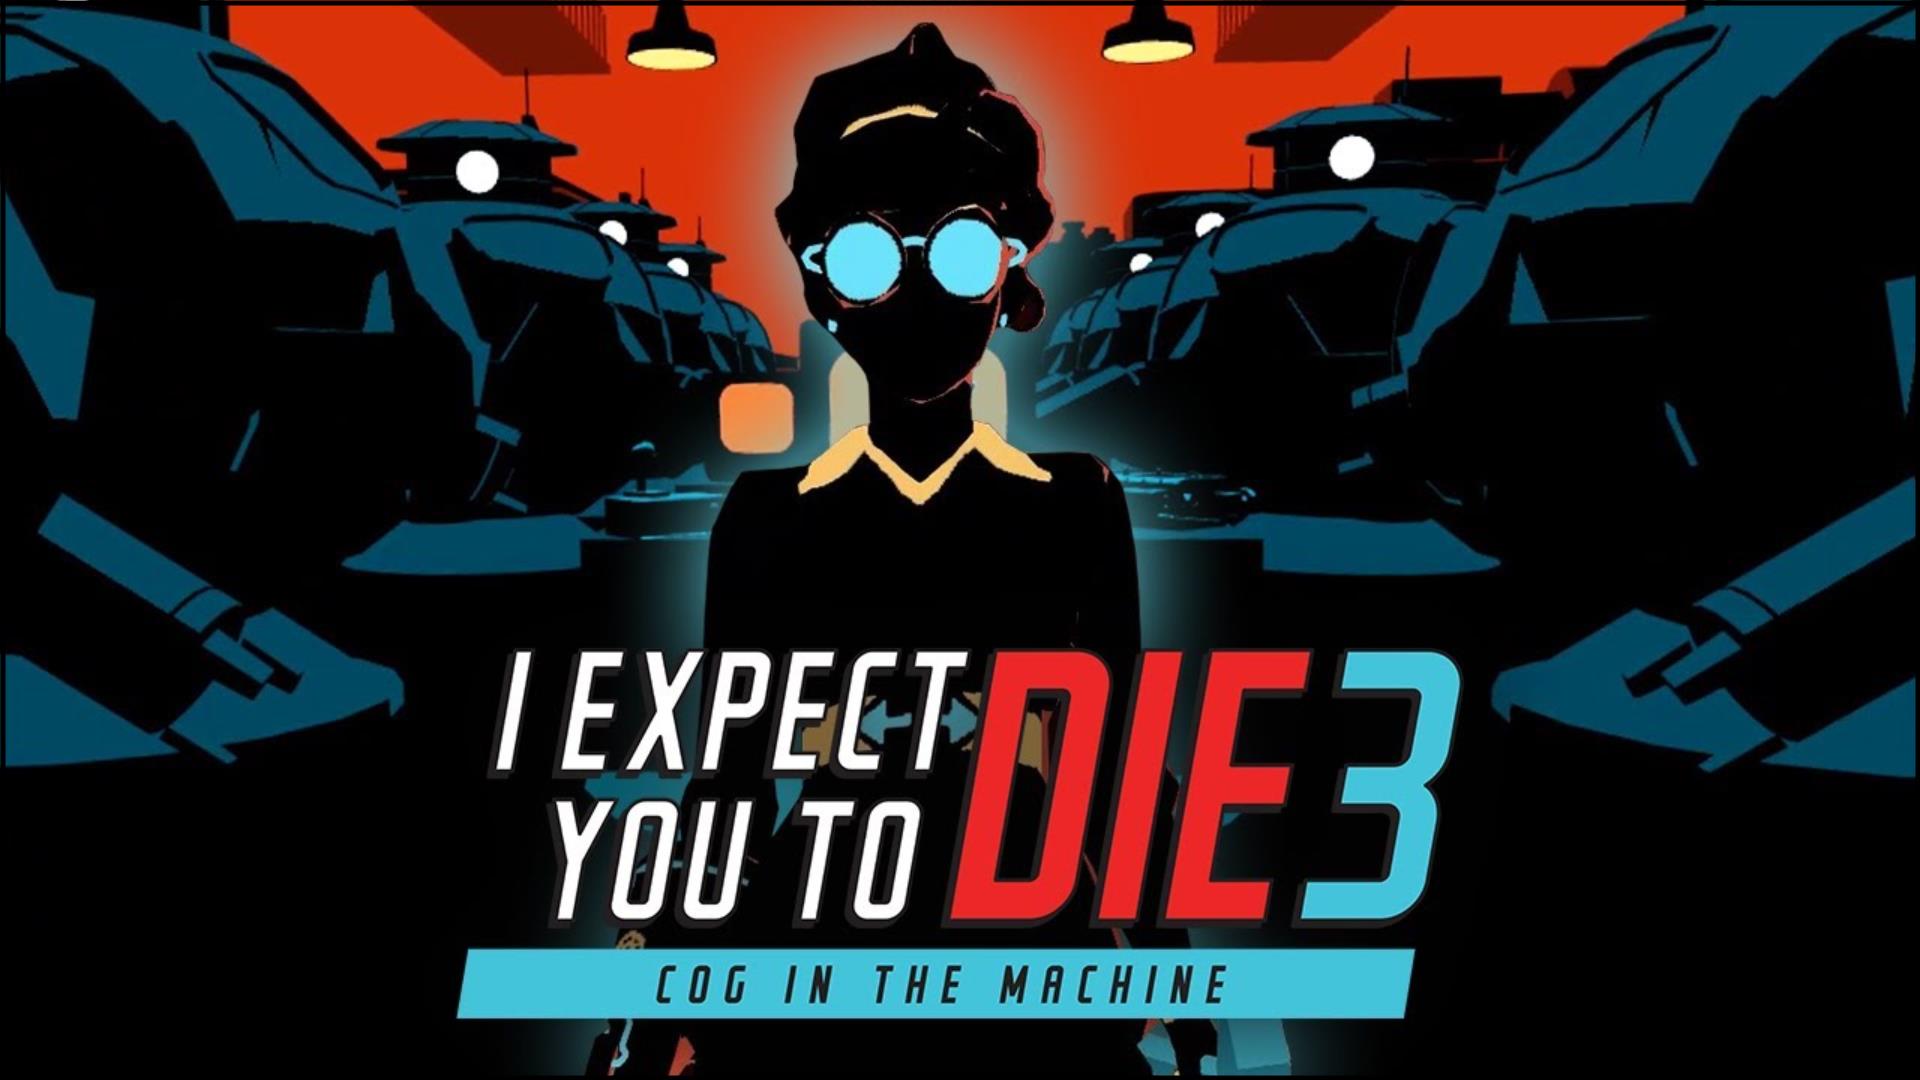 9 – I Expect You to Die 3